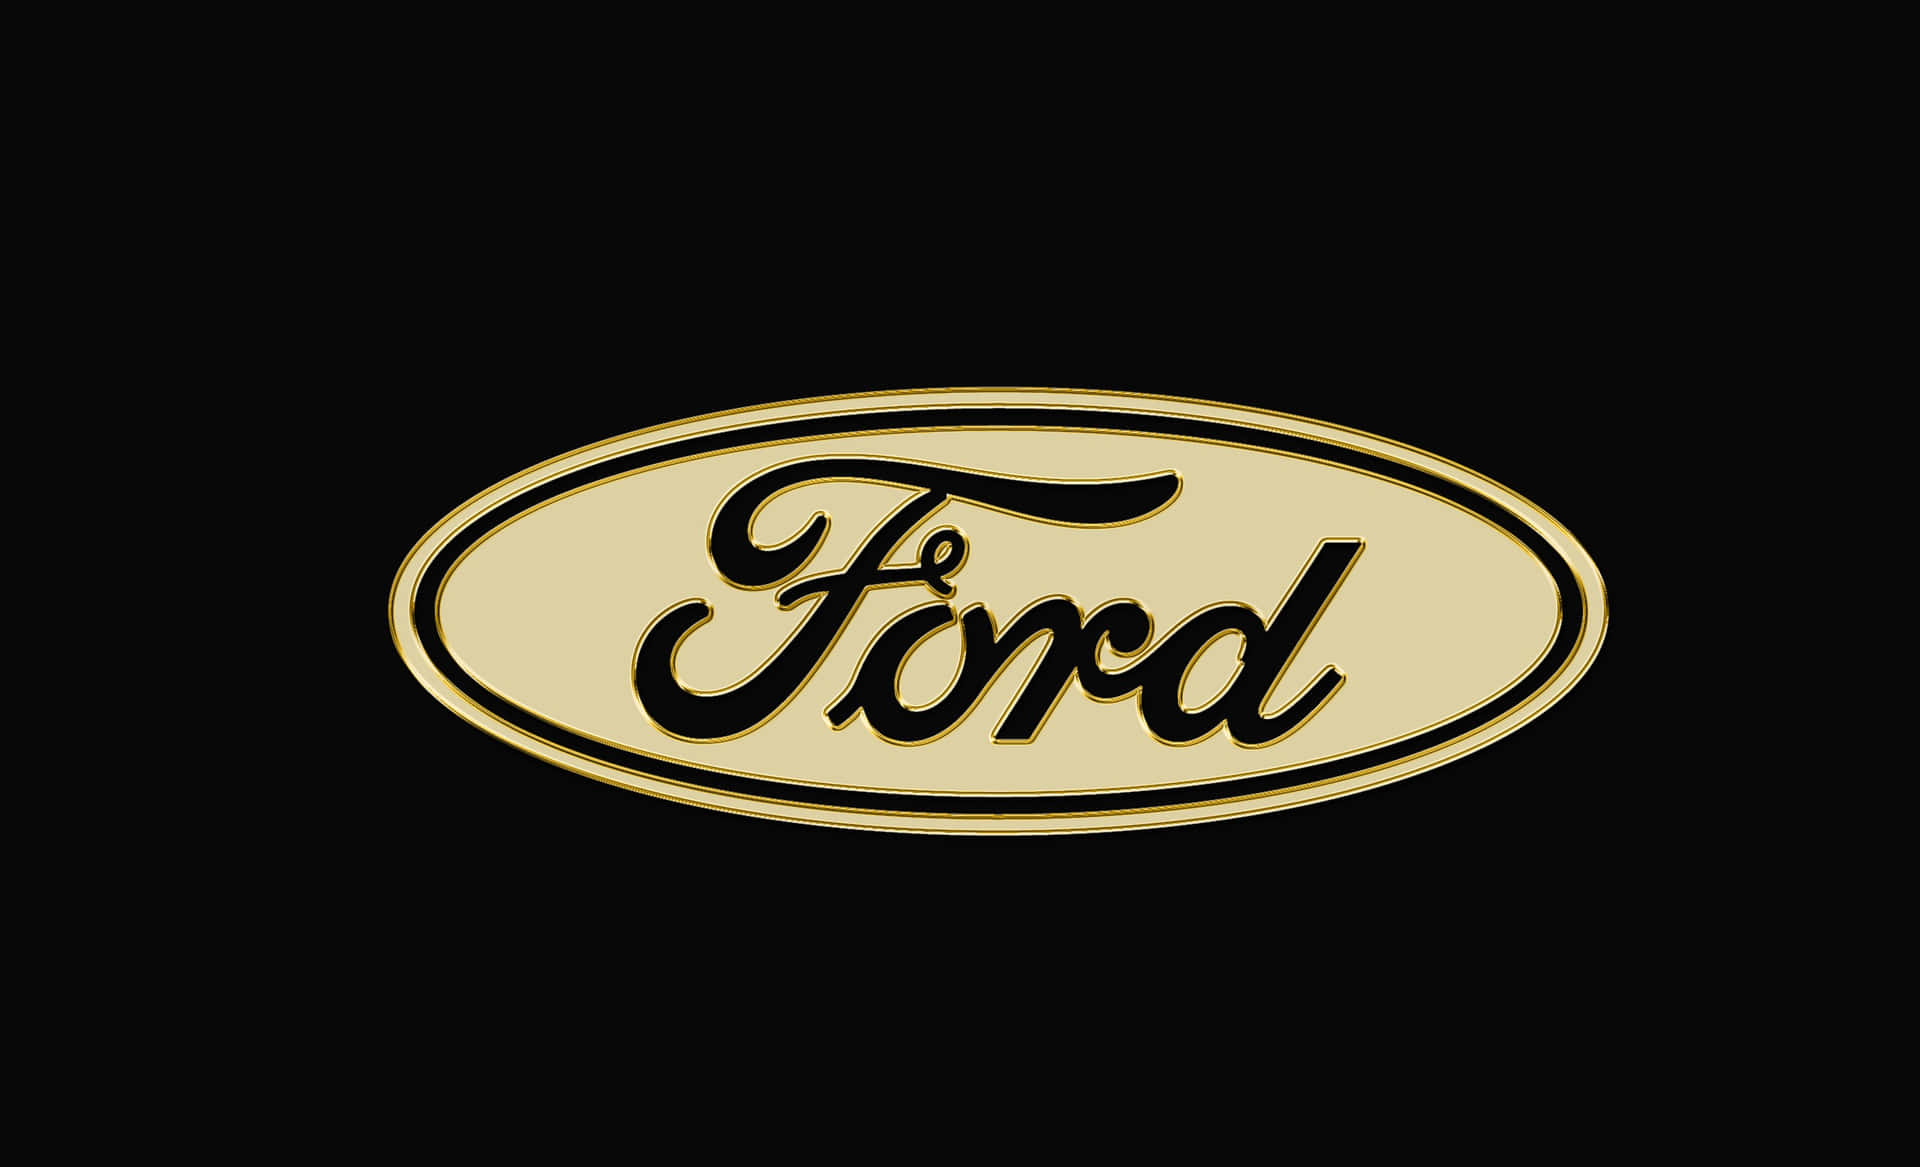 A well-lit Ford logo shining bright on a dark background Wallpaper